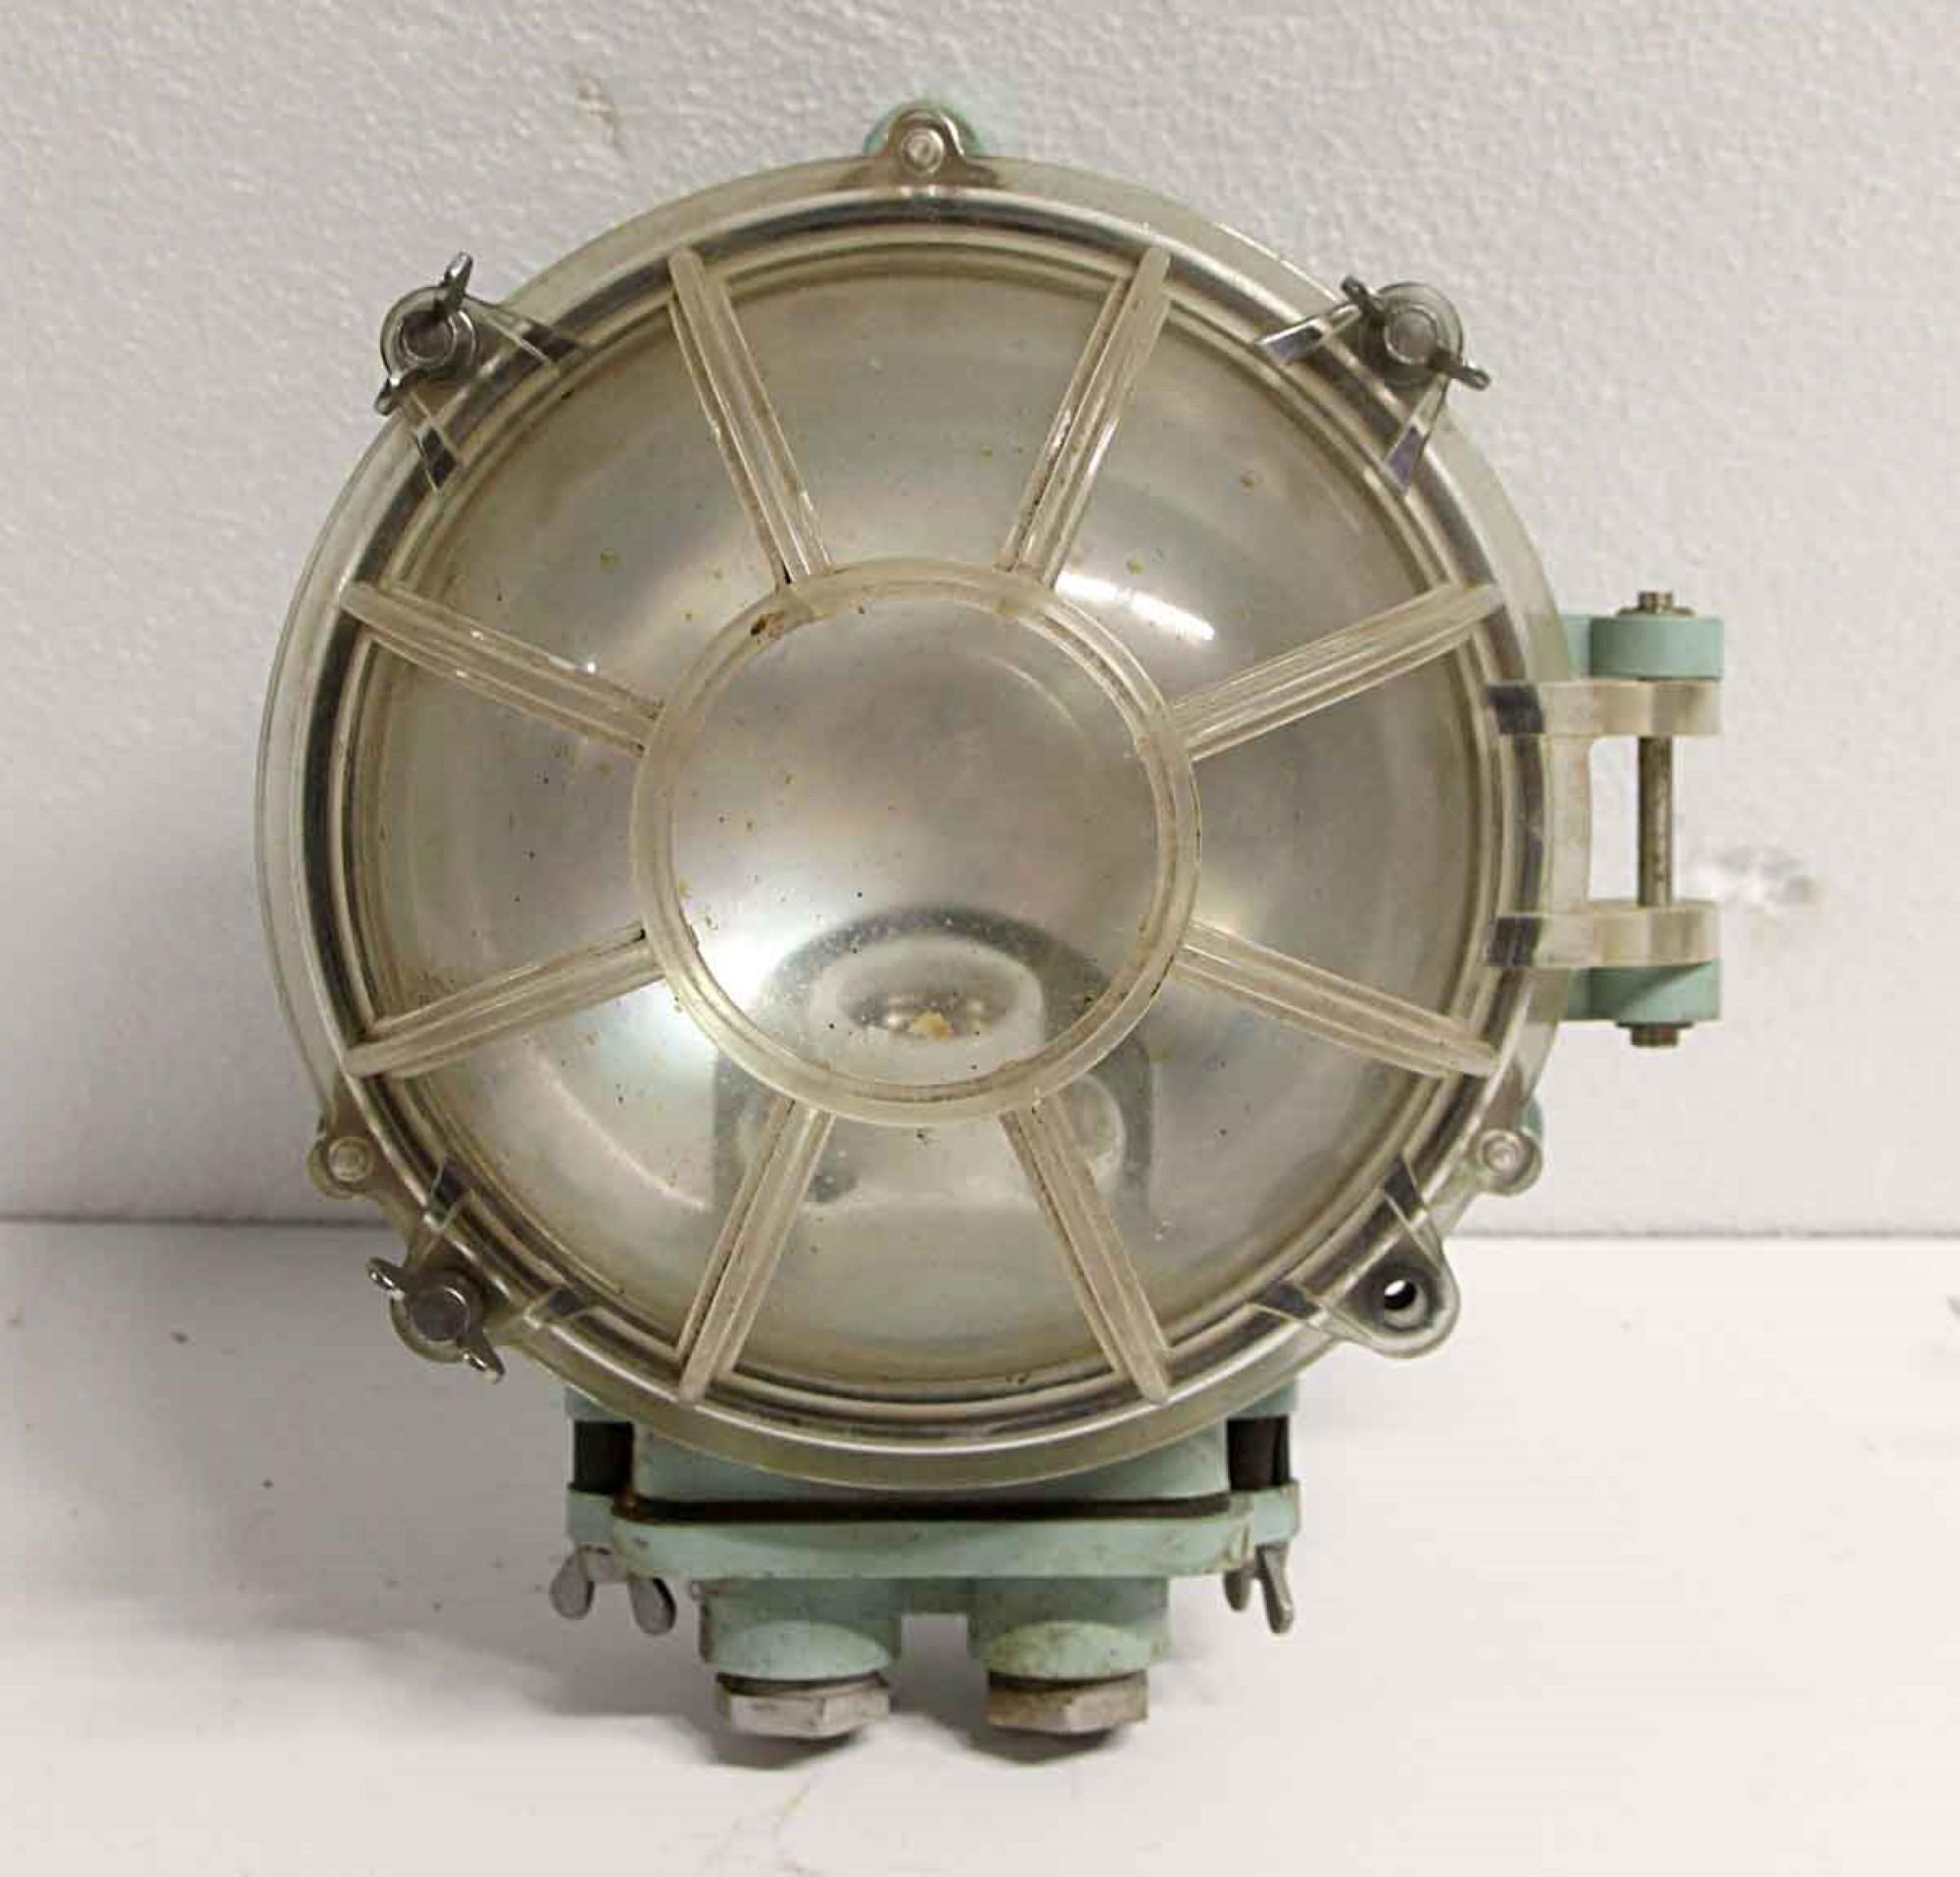 1990s green and clear Industrial Lucite face nautical wall sconce. Used on ships and boats. Cleaned and rewired. Small quantity available at time of posting. Priced each. Please inquire. Please note, this item is located in our Scranton, PA location.